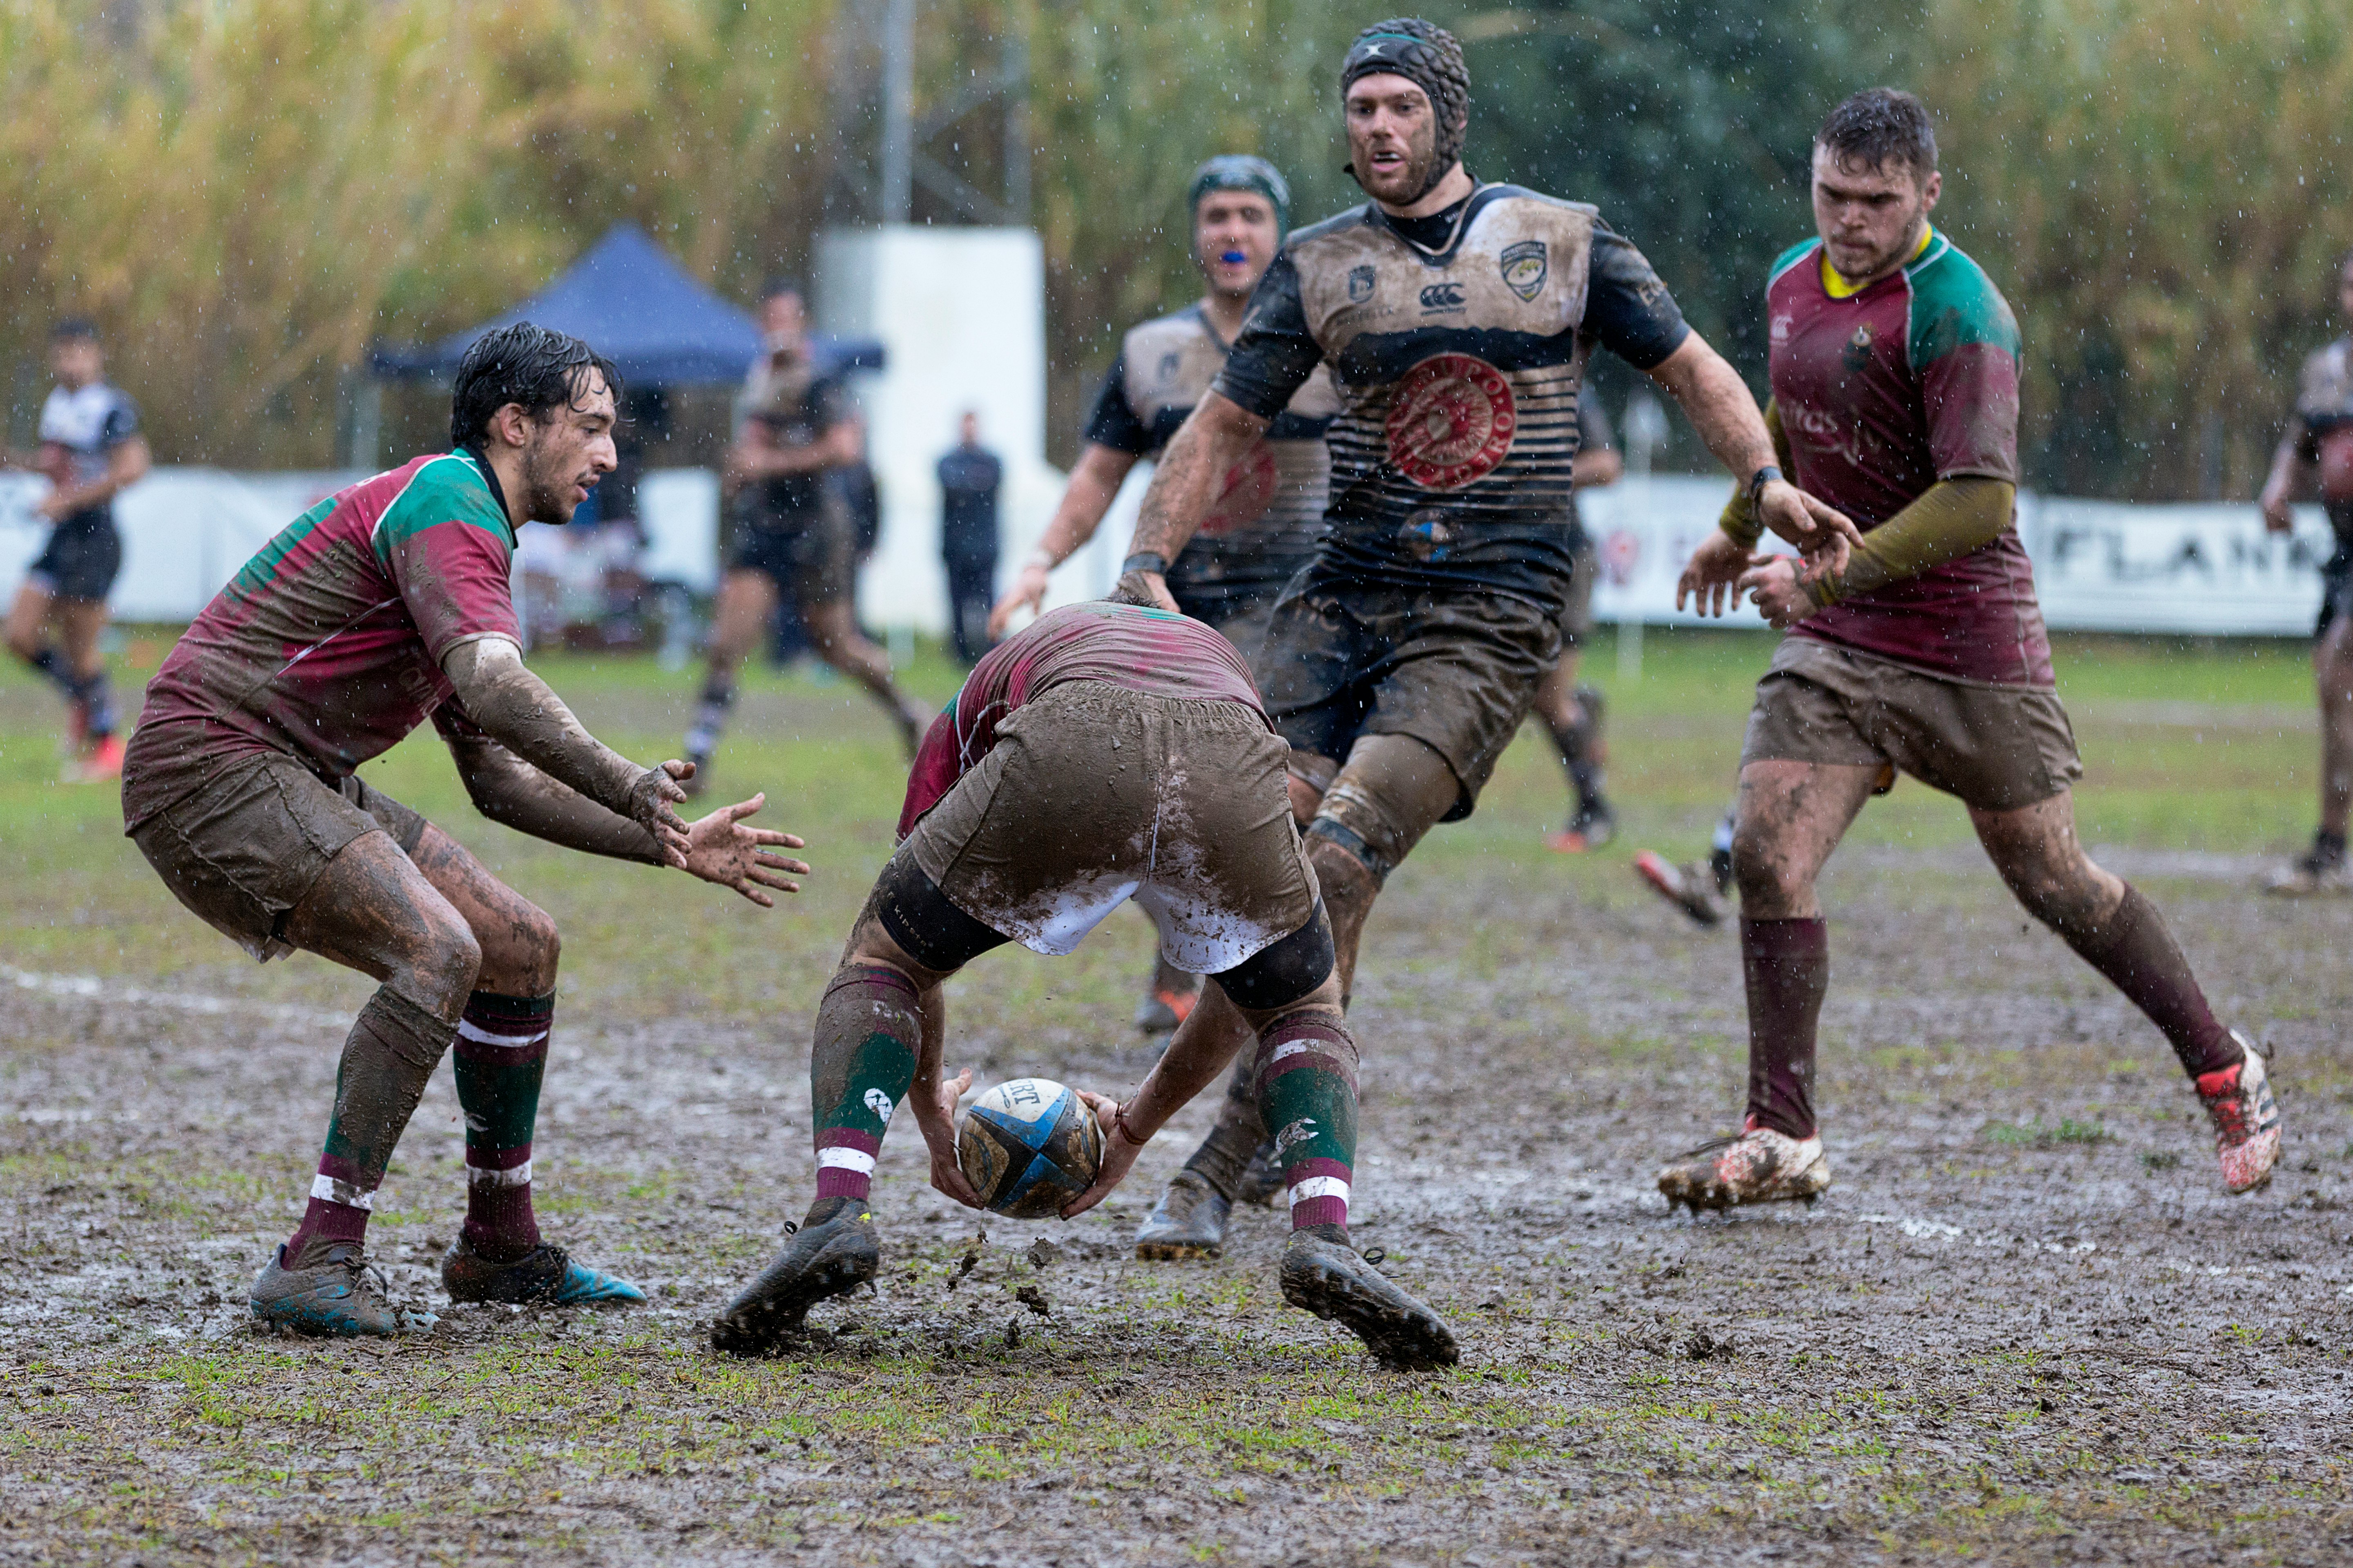 men playing rugby on field